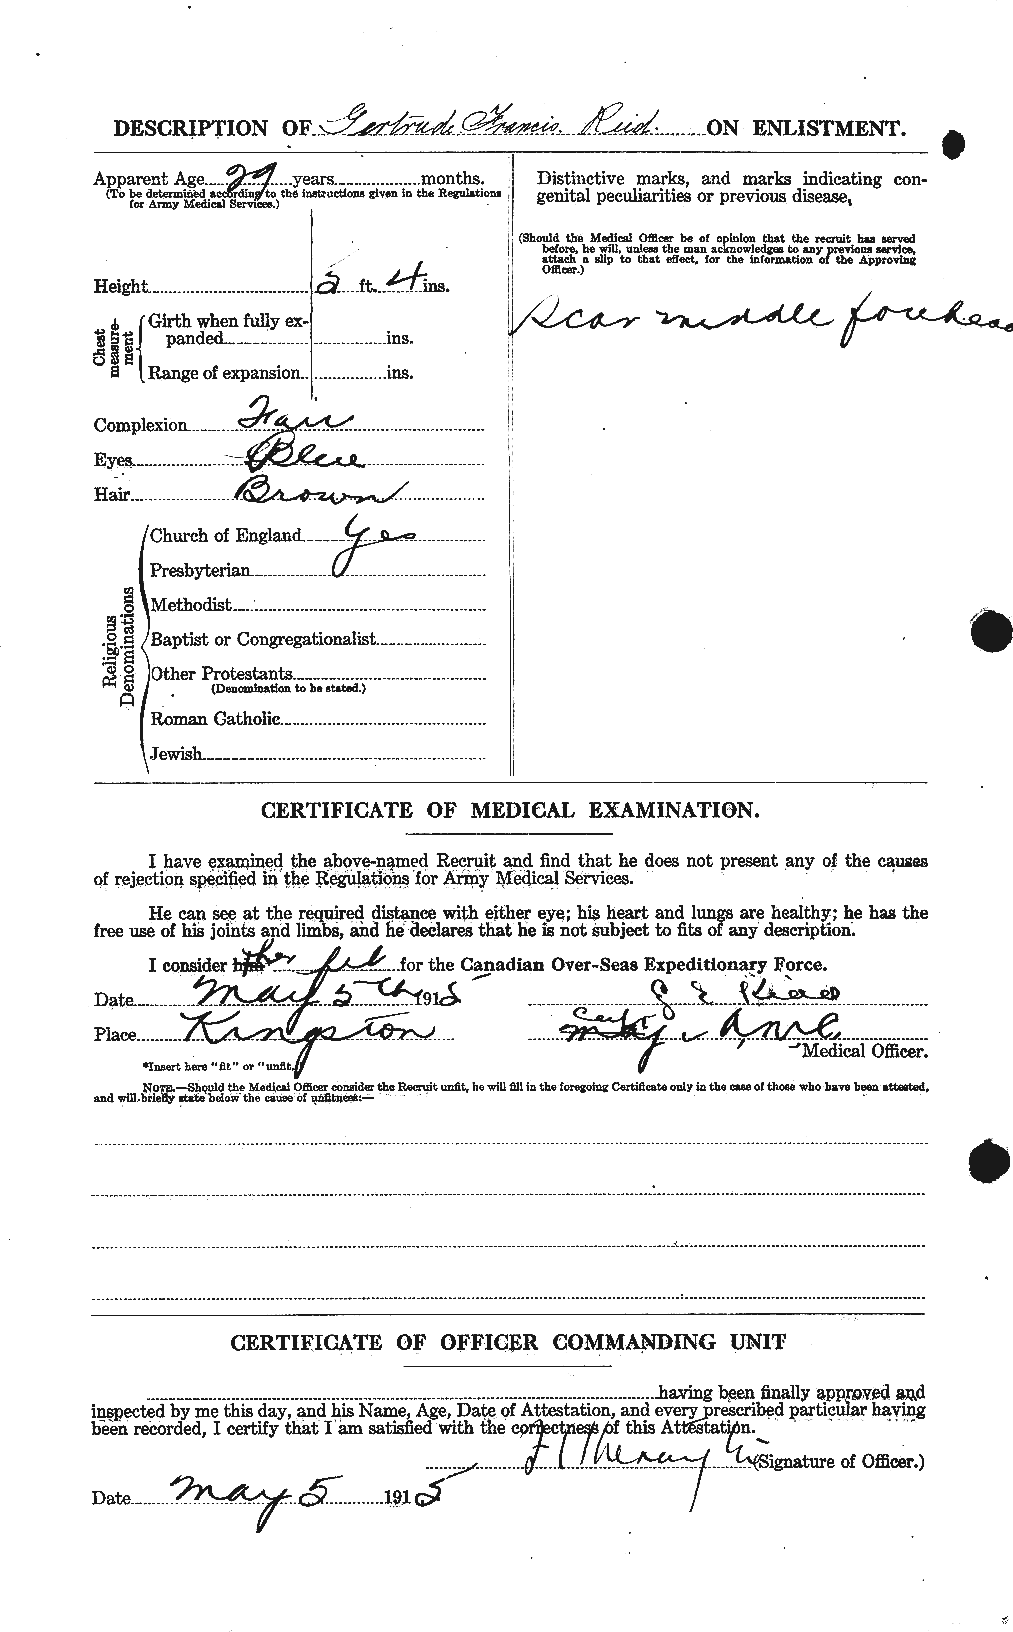 Personnel Records of the First World War - CEF 598552b